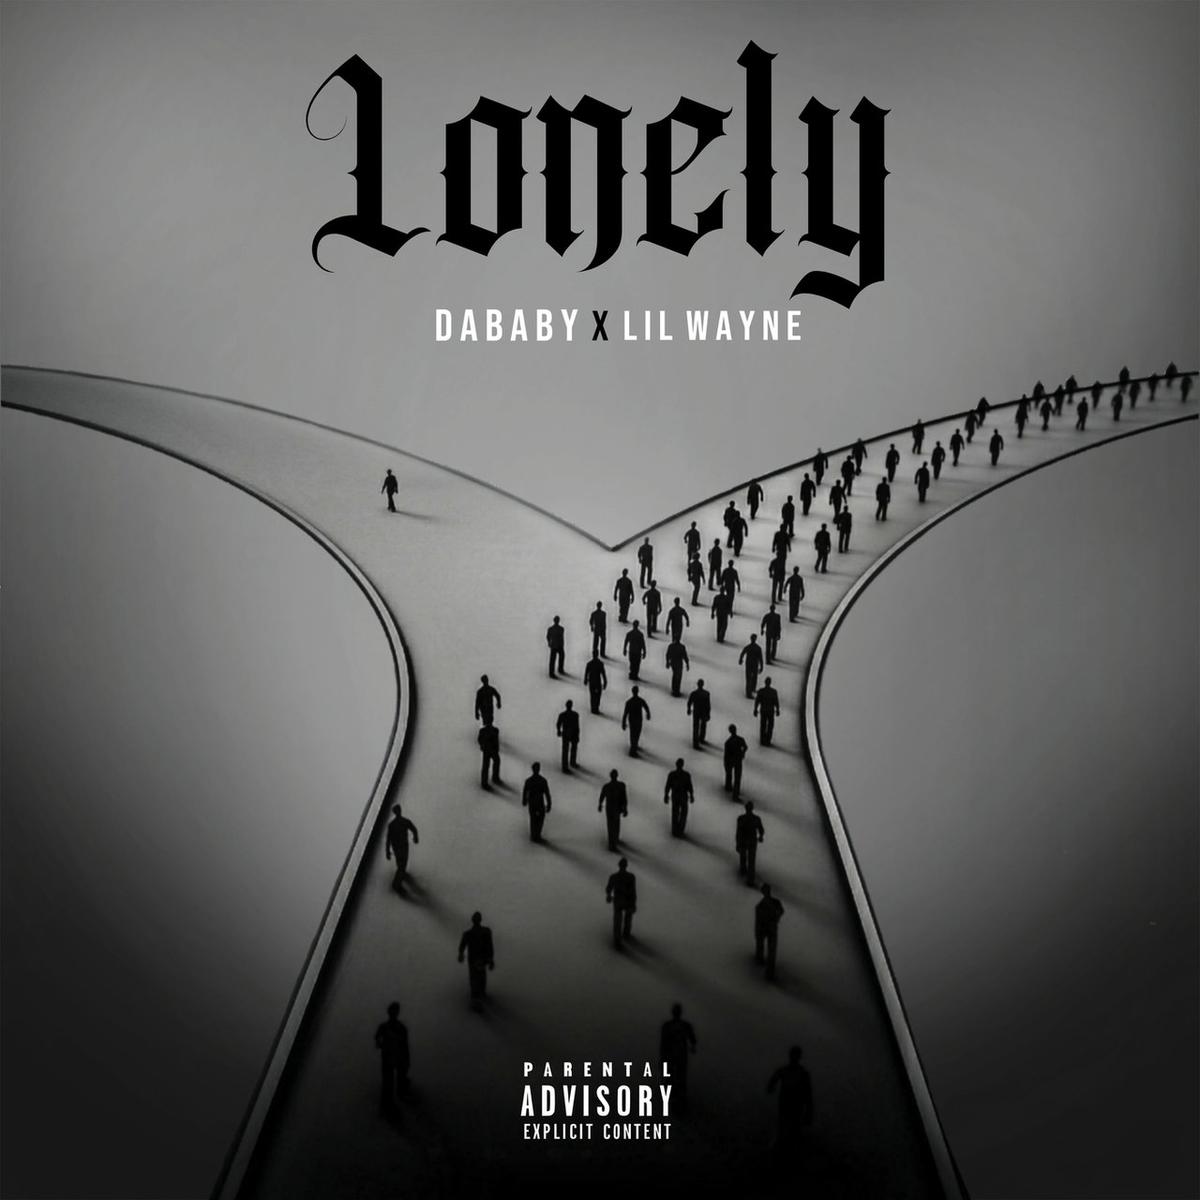 DaBaby & Lil Wayne Unite For The Very Powerful “Lonely”